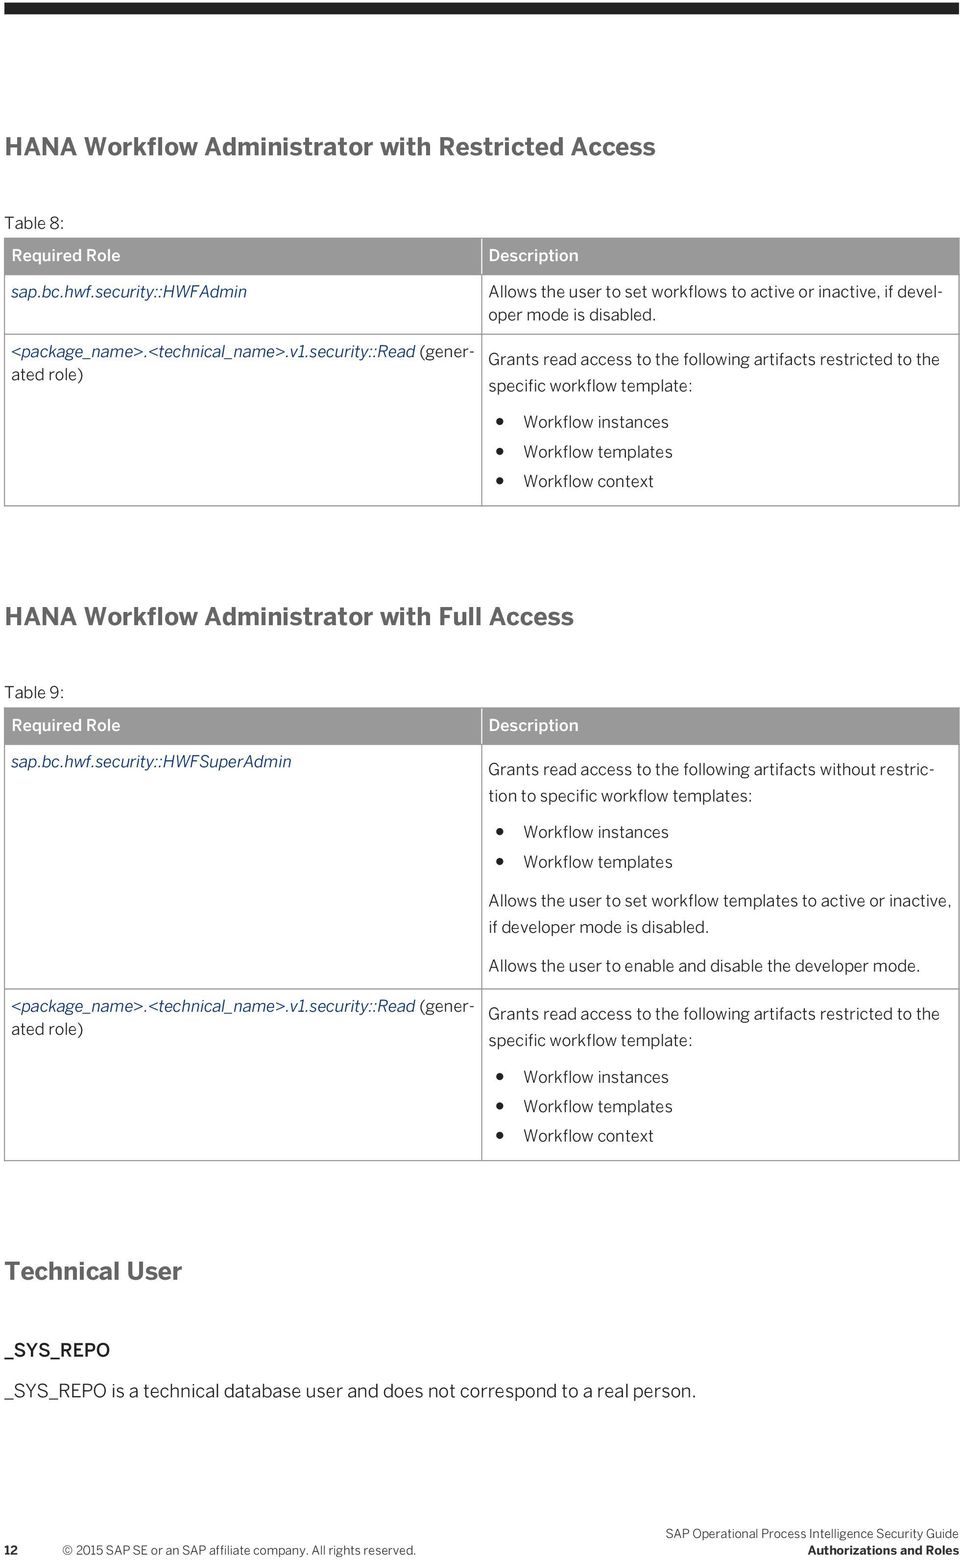 Grants read access to the following artifacts restricted to the specific workflow template: Workflow instances Workflow templates Workflow context HANA Workflow Administrator with Full Access Table